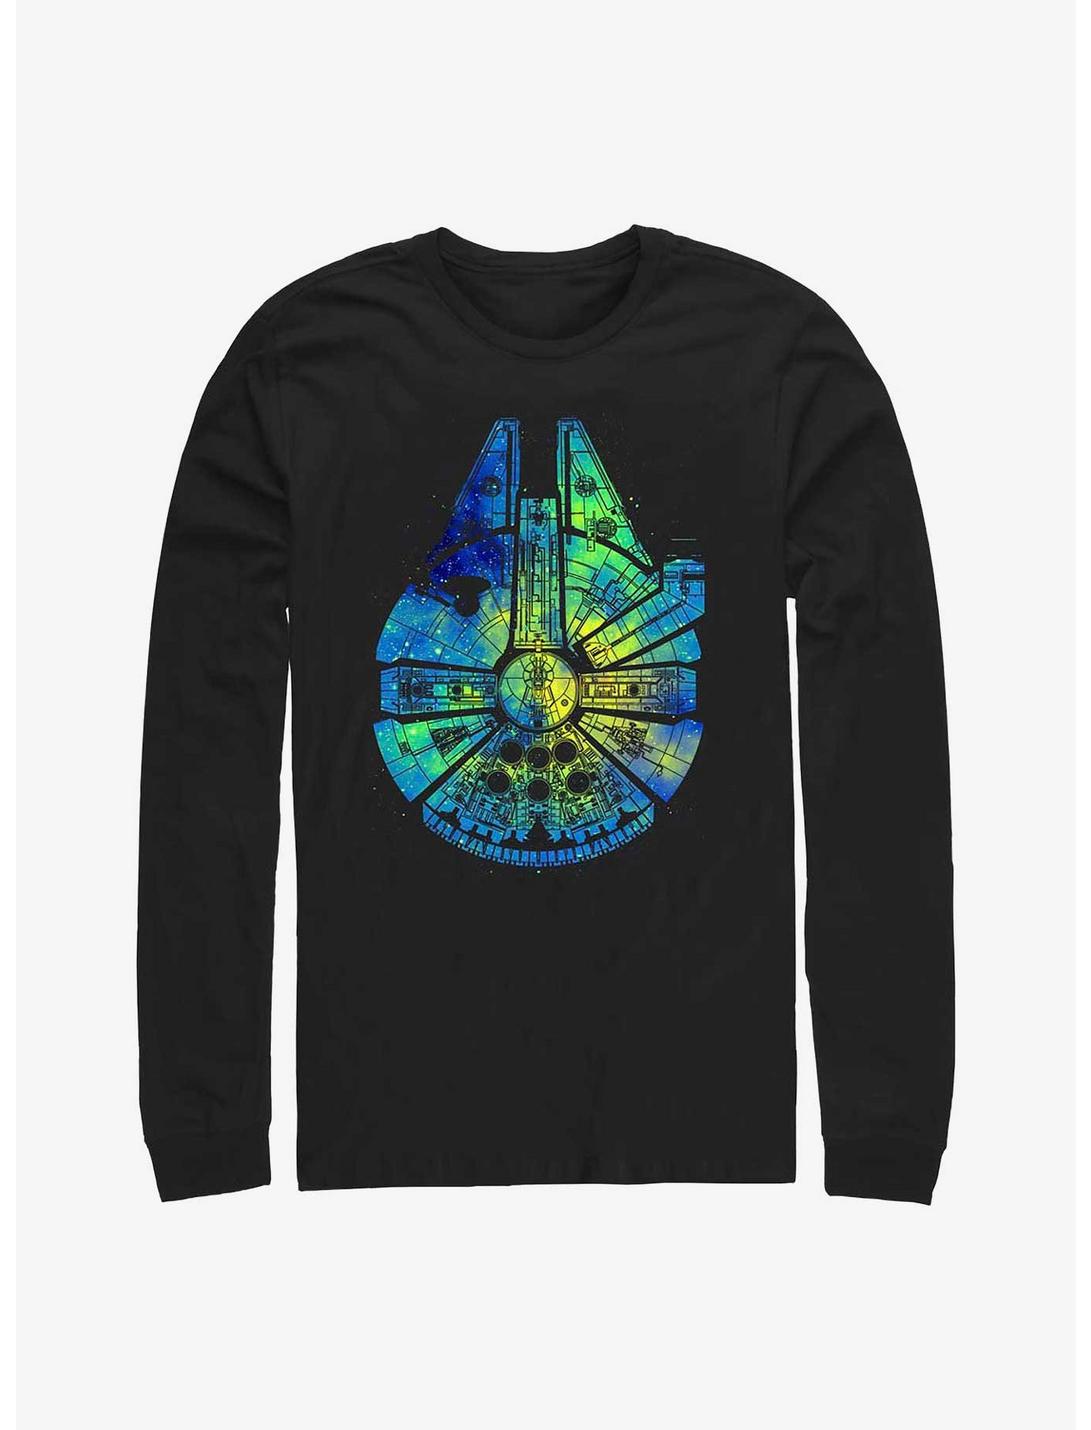 Star Wars Touch The Sky Long Sleeve T-Shirt, BLACK, hi-res